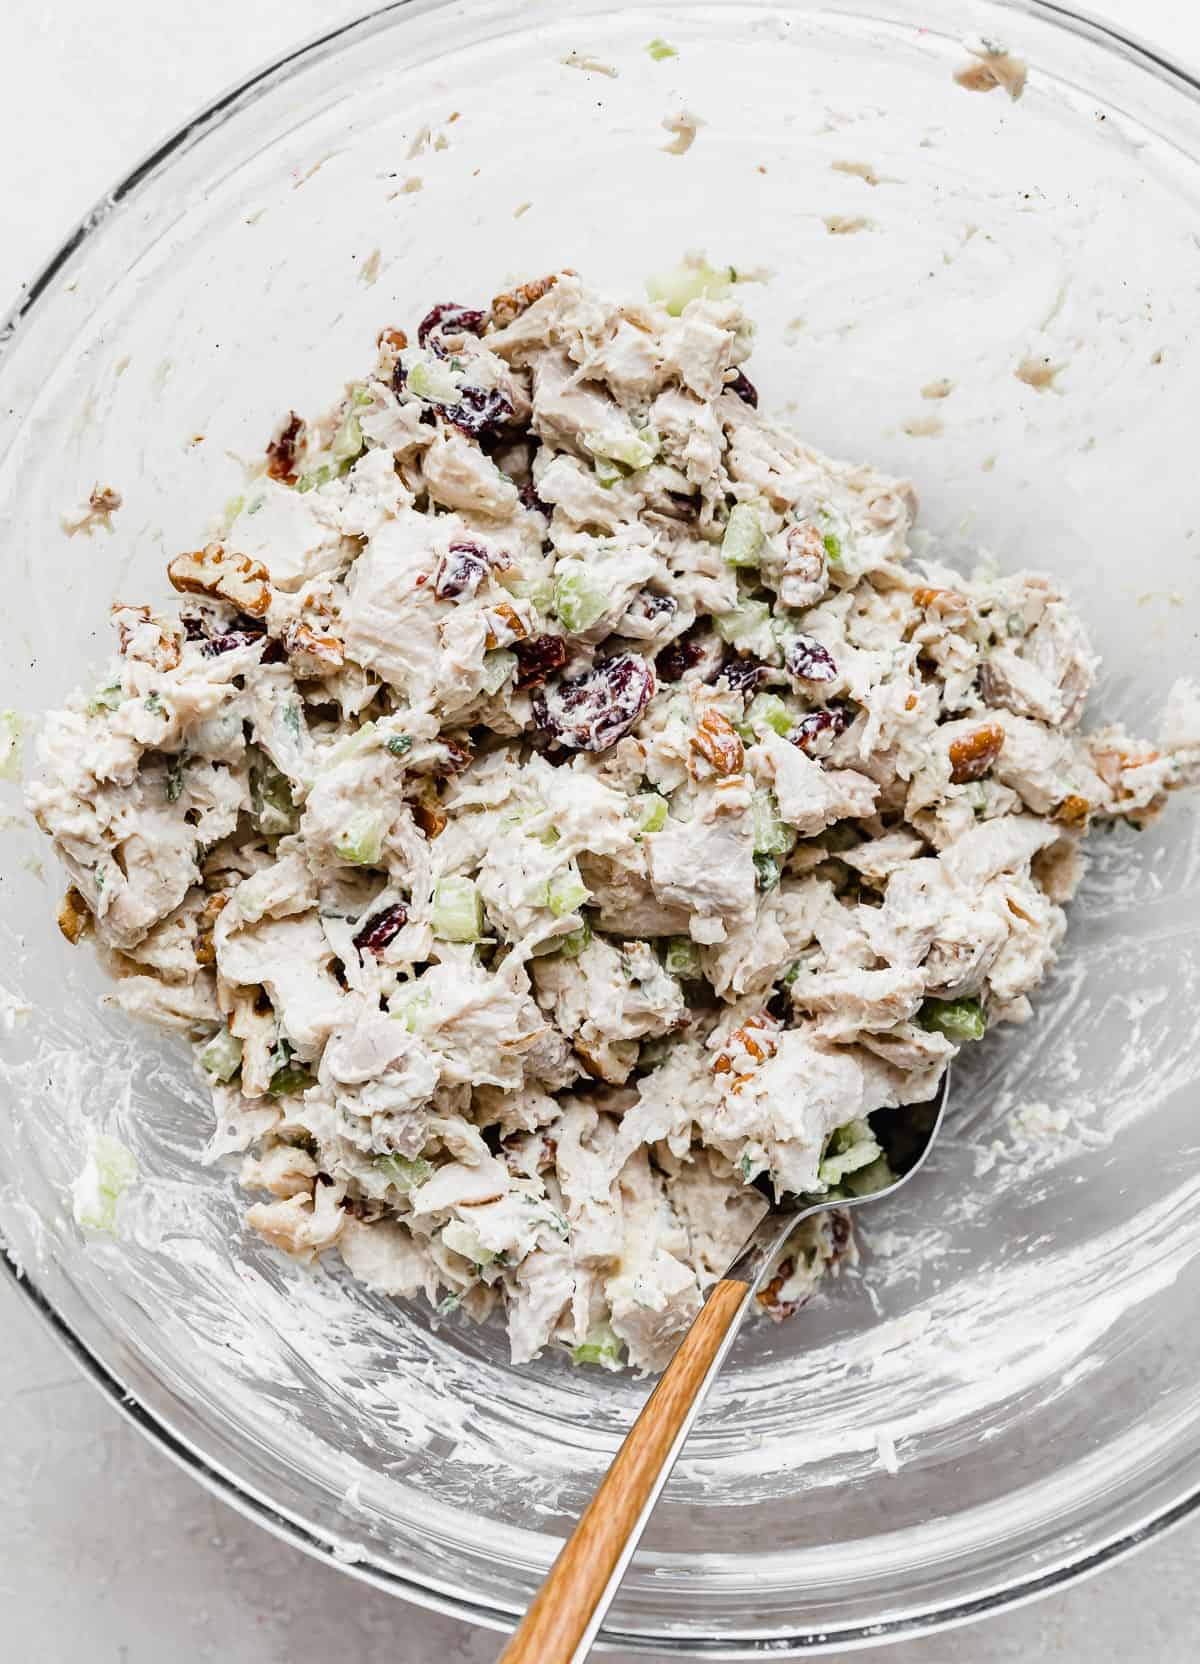 Leftover Cranberry Turkey Salad Sandwich ingredients mixed in a glass bowl.